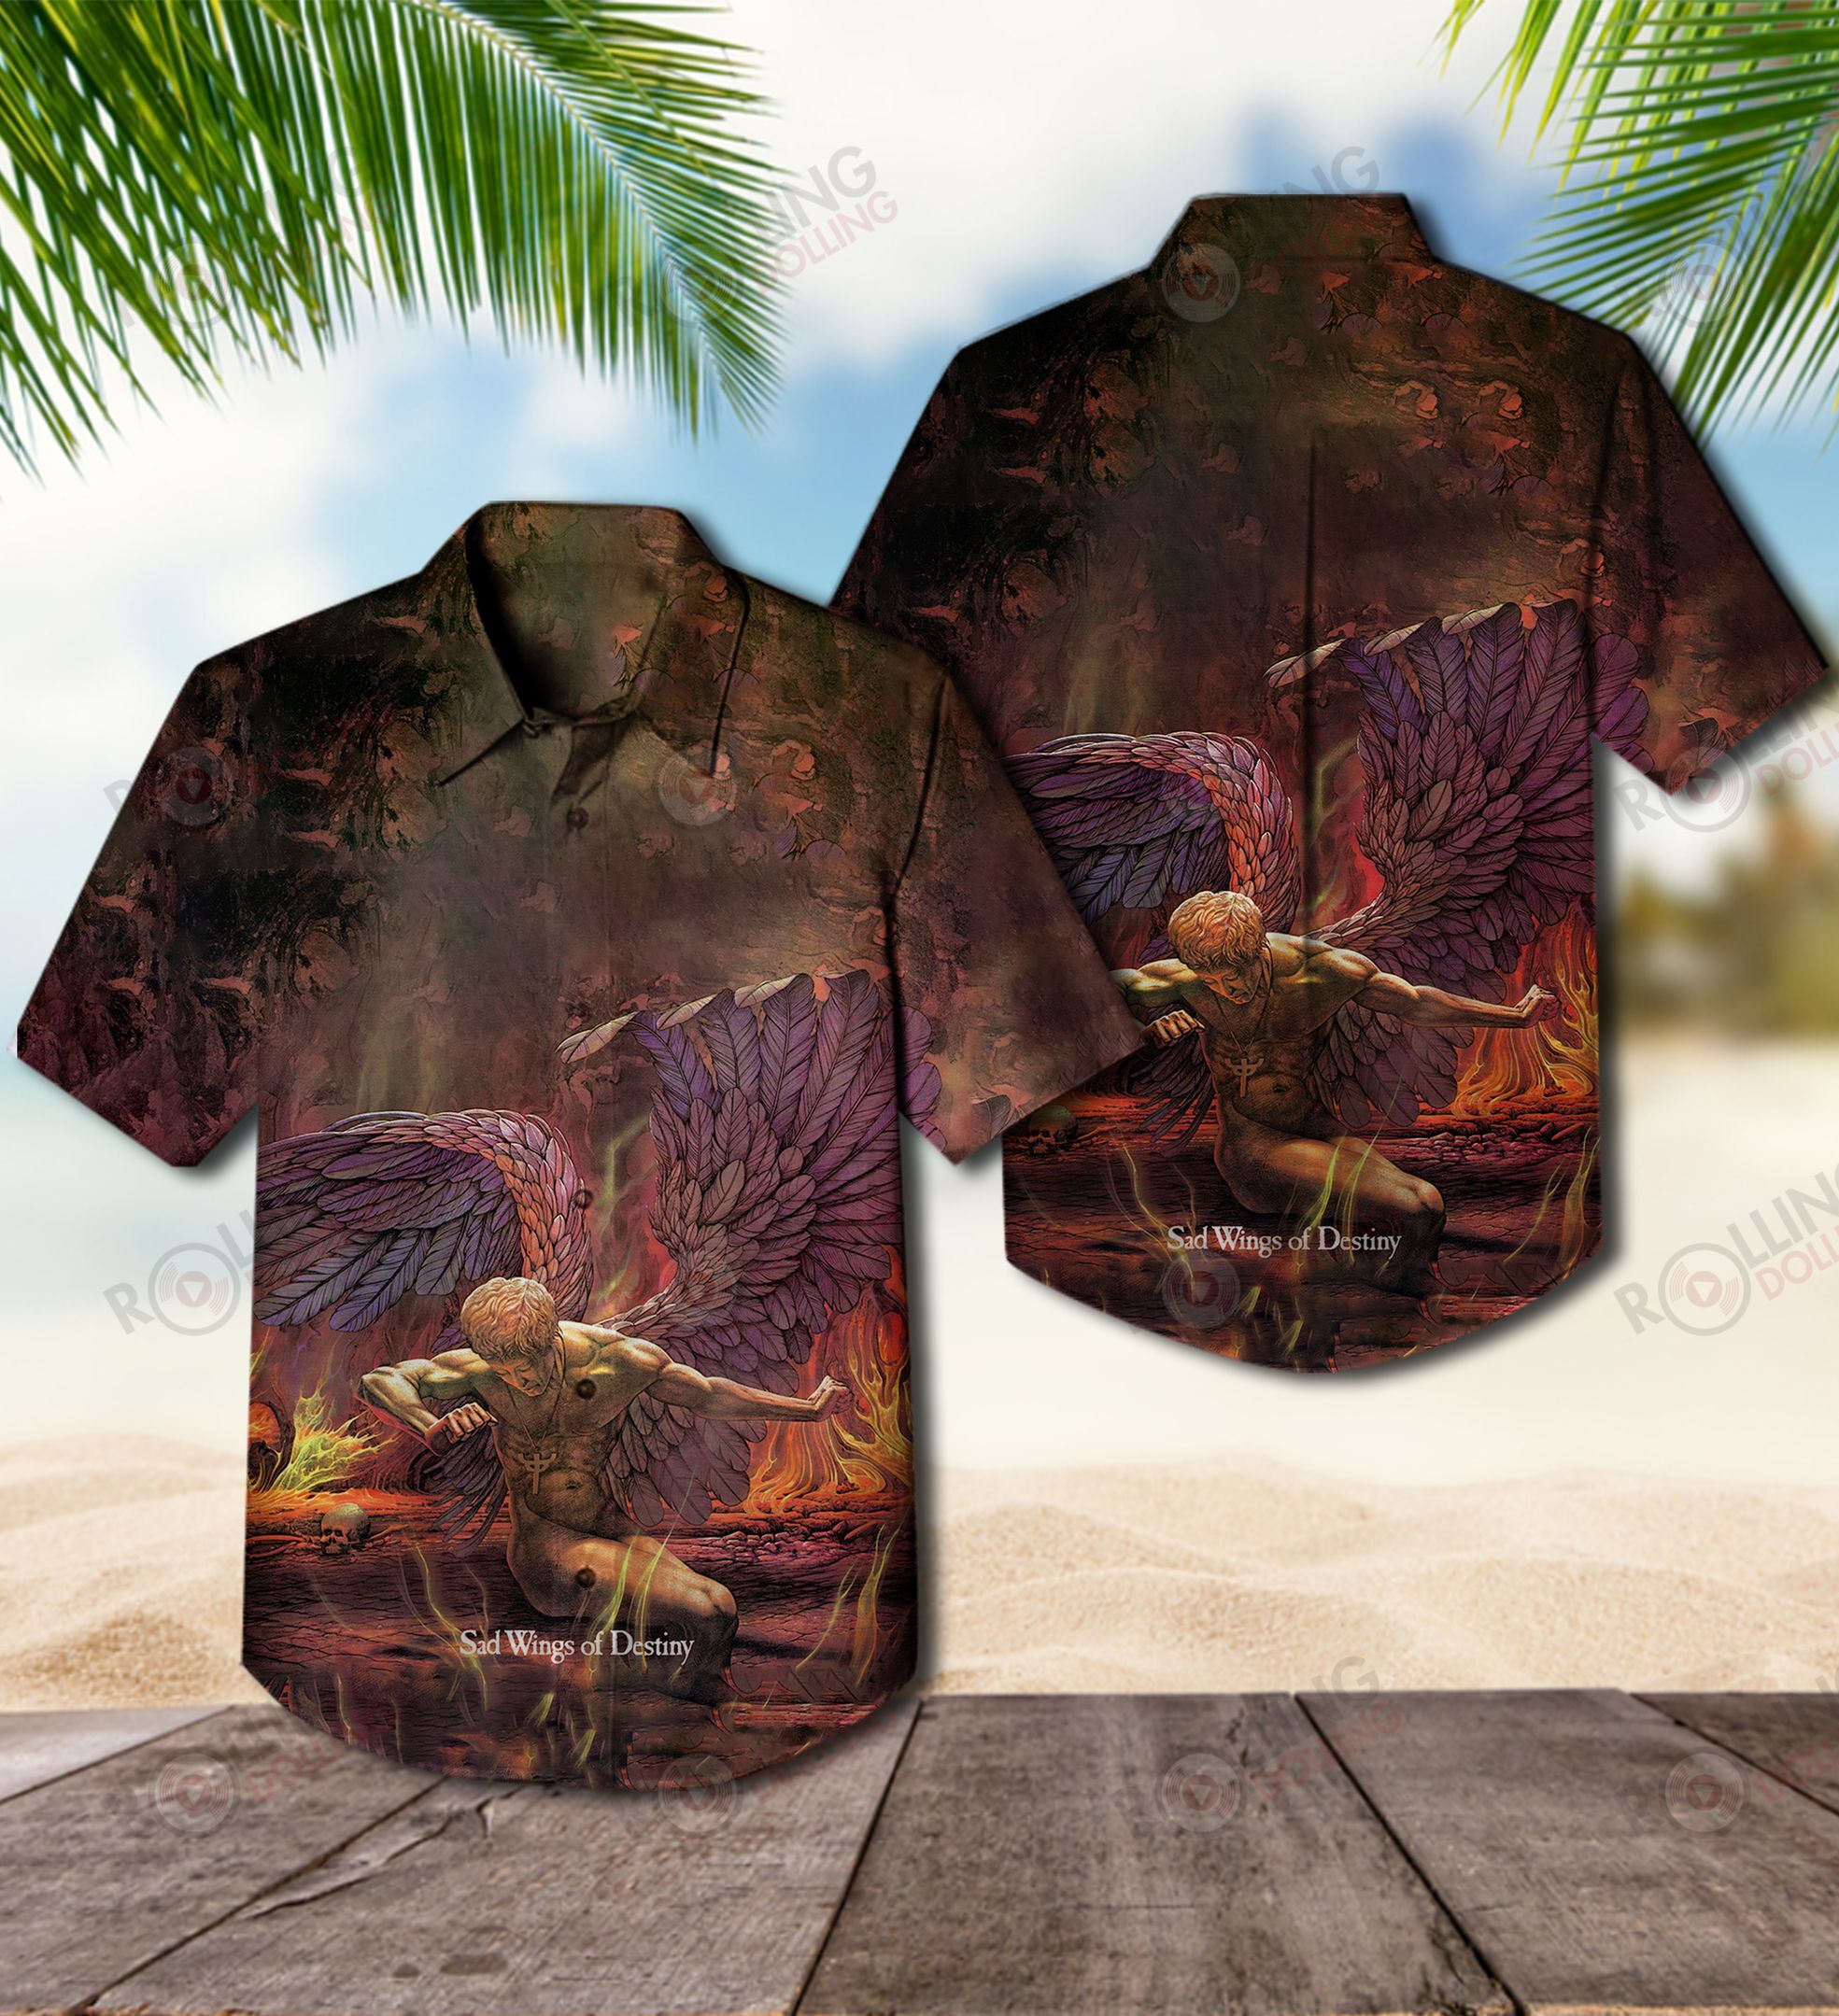 We have compiled a list of some of the best Hawaiian shirt that are available 237